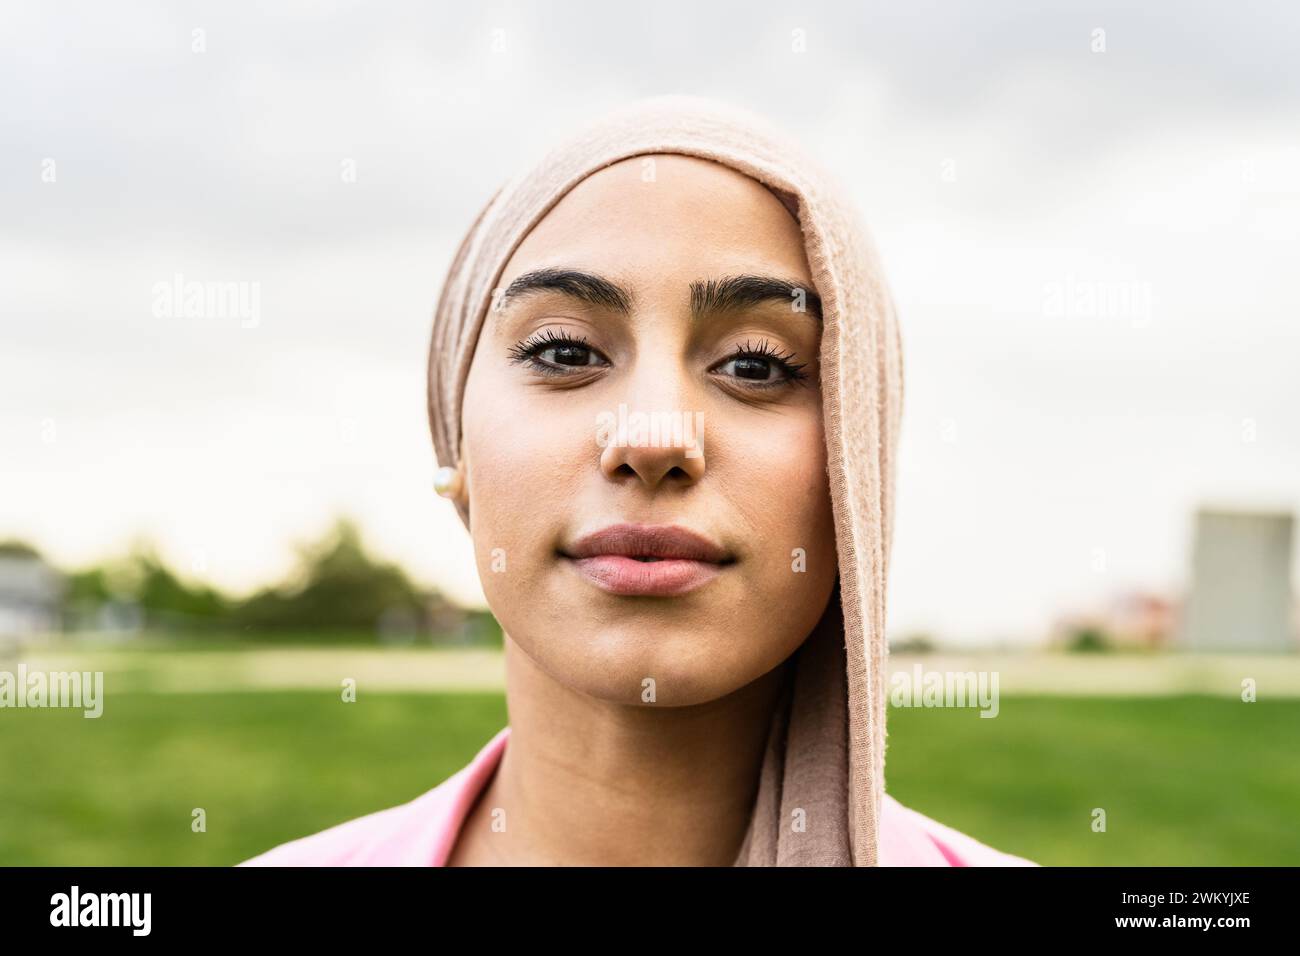 Portrait of Muslim woman looking in front of camera Stock Photo